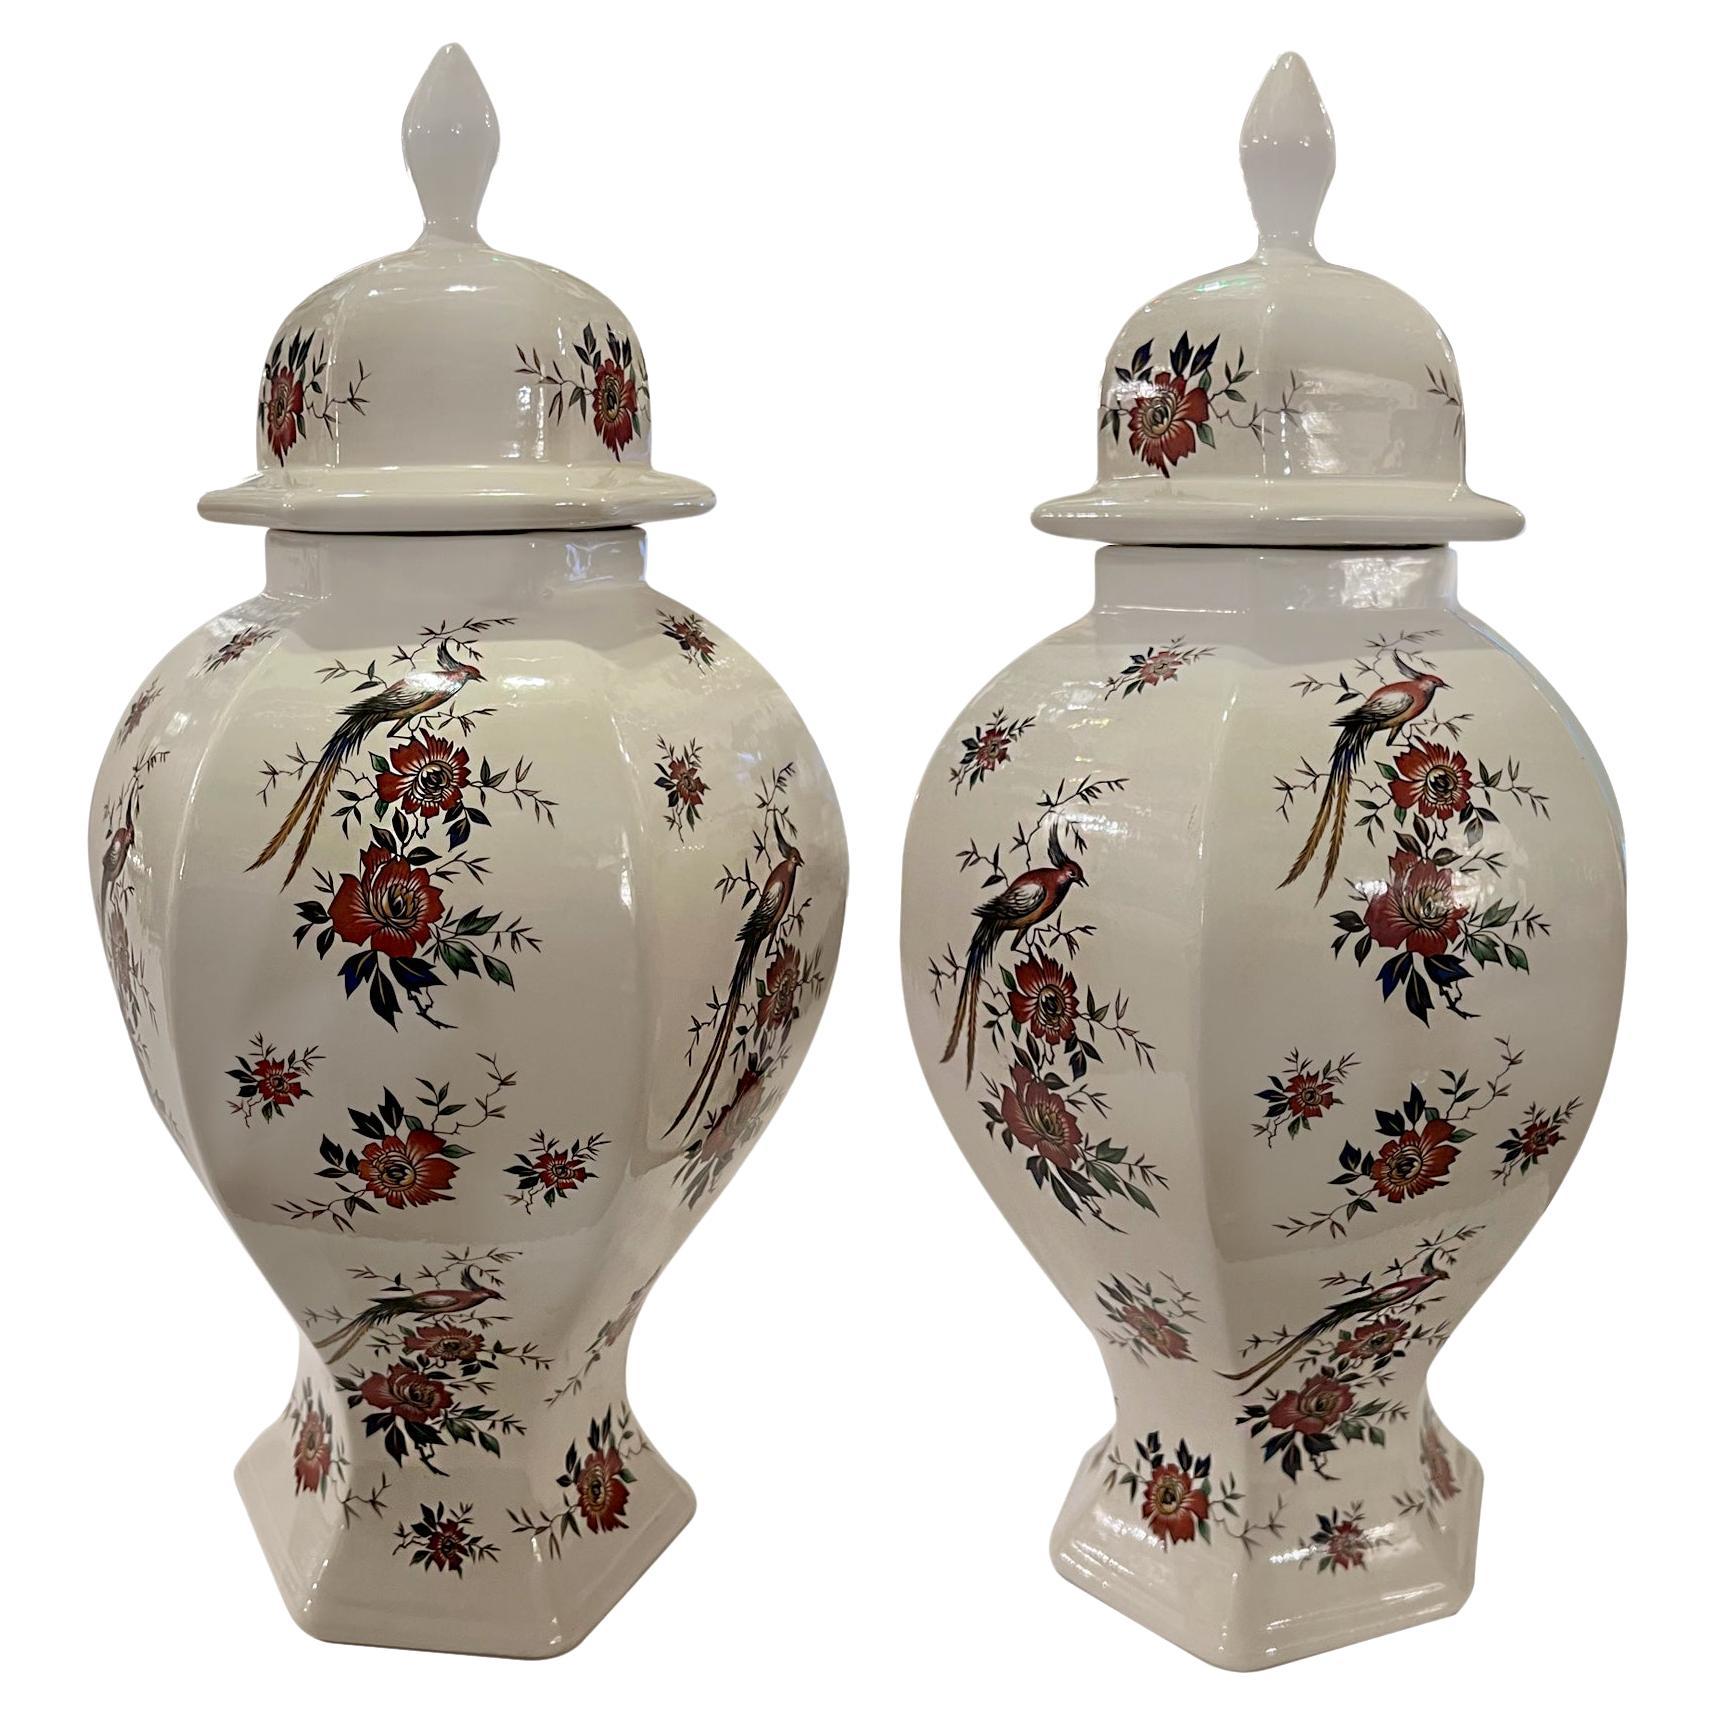 Pair of English Porcelain Covered Jars